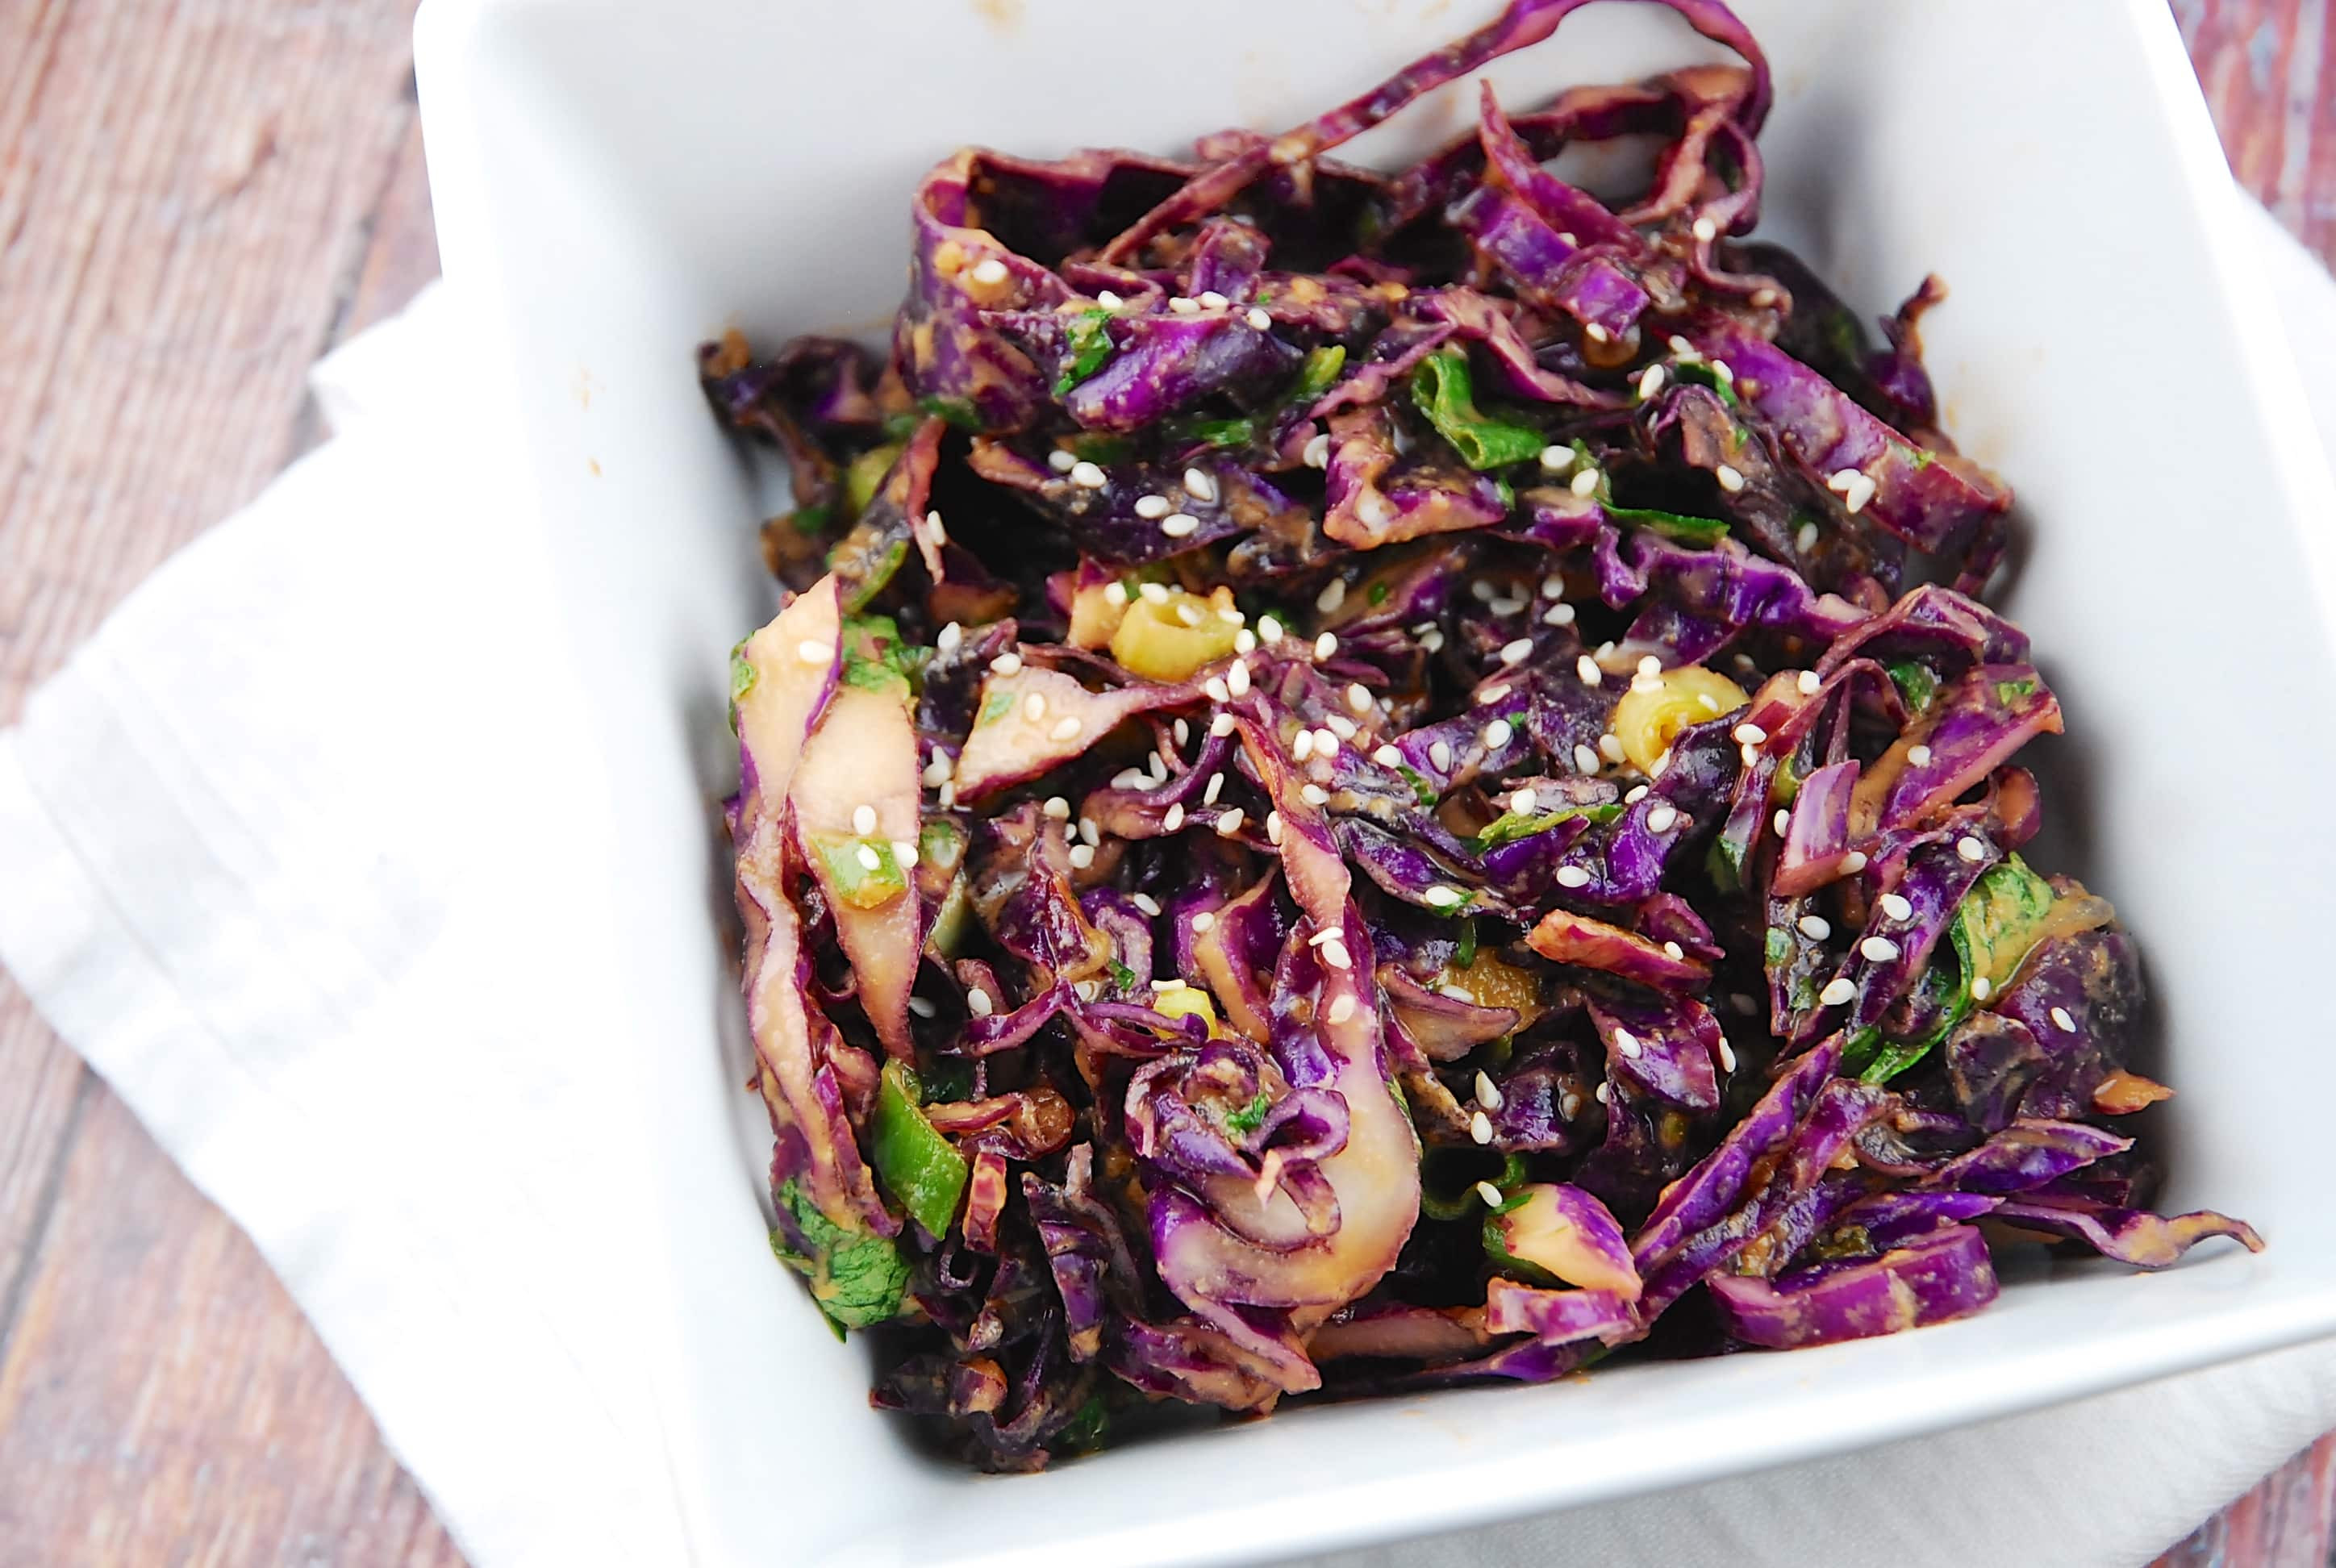 Healthy Red Cabbage Recipes
 Asian Red Cabbage Salad Recipe 3 Points LaaLoosh